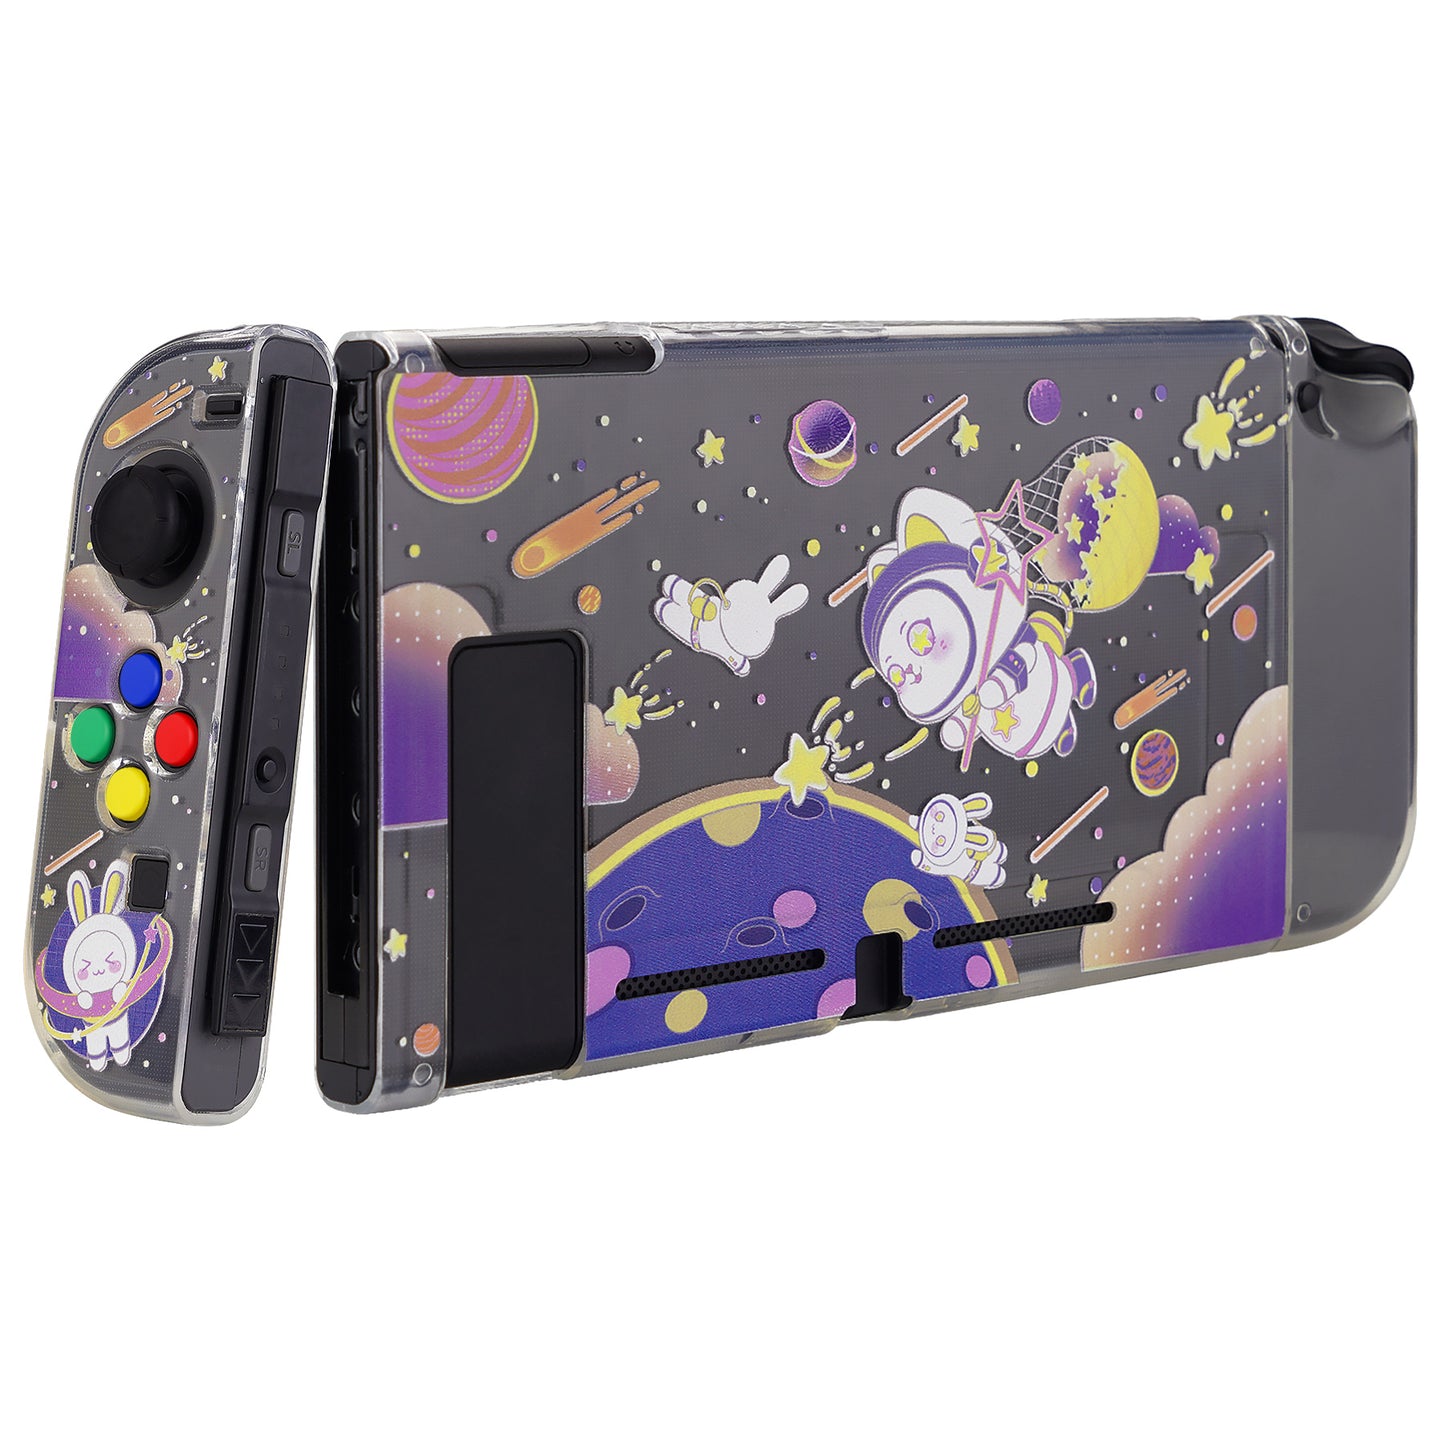 PlayVital Protective Case for Nintendo Switch, Soft TPU Slim Case Cover for Nintendo Switch Joycon Console with Purple ABXY Direction Button Caps - Space Cat - NTU6031 PlayVital